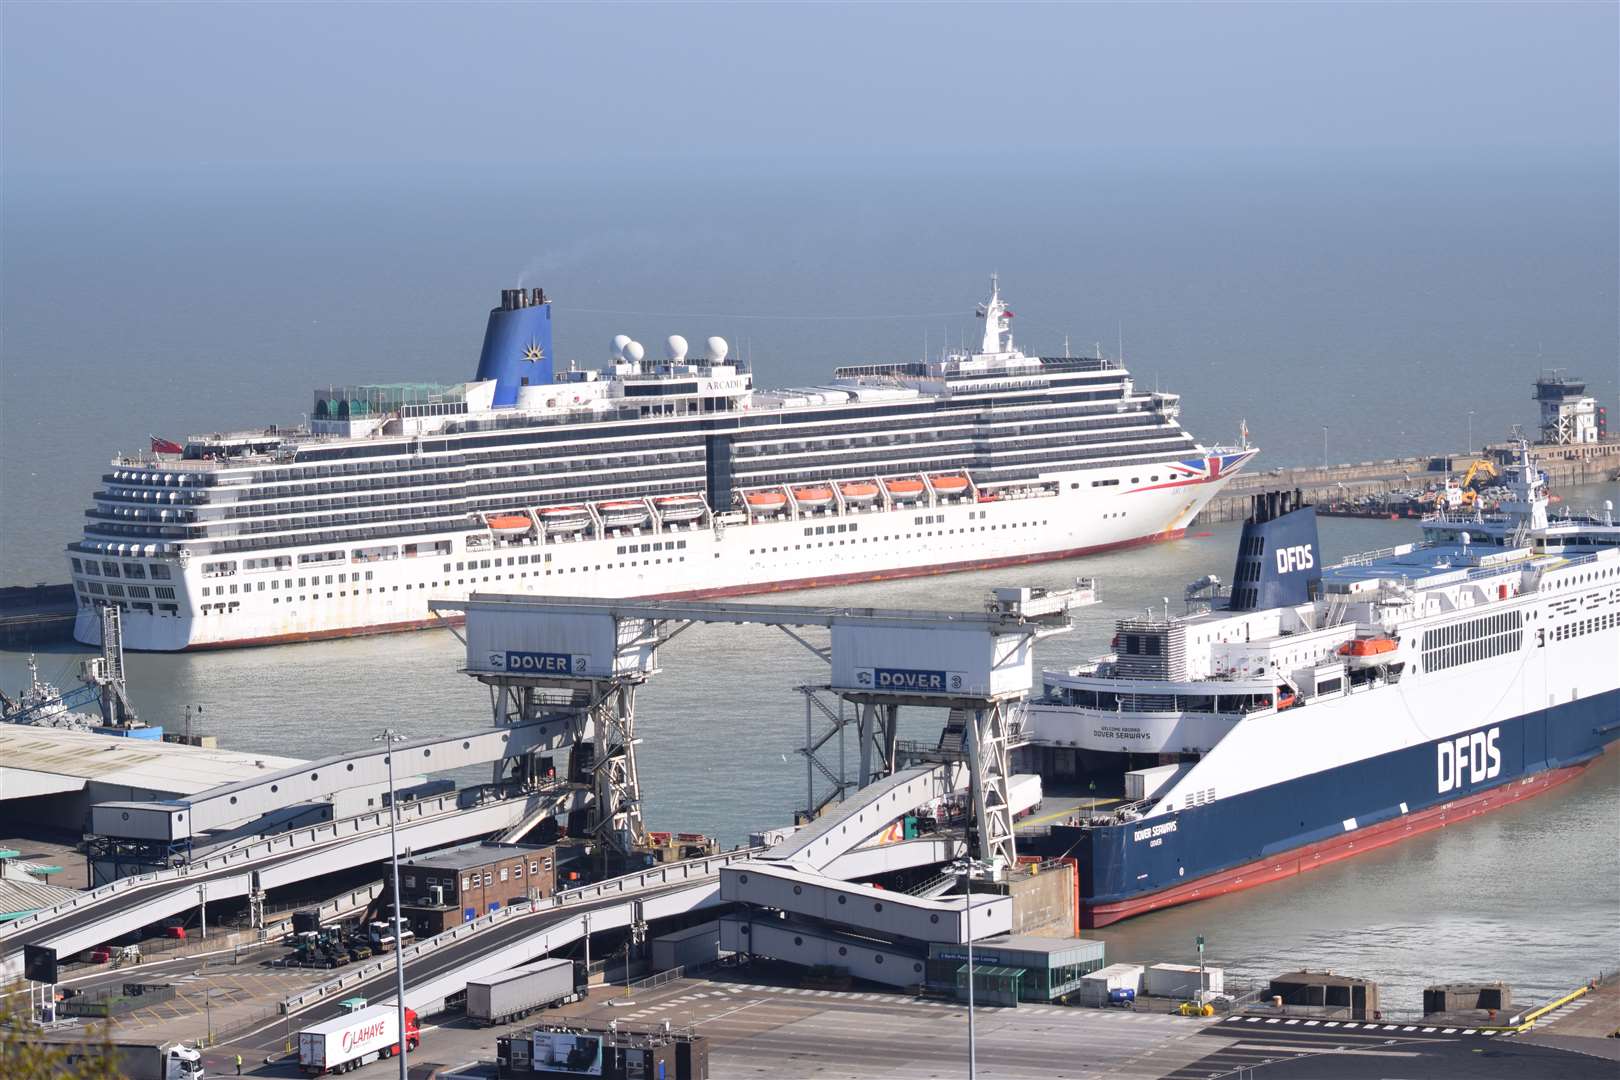 P&O Cruises Arcadia was laid up at Dover's Eastern Docks during the lockdown